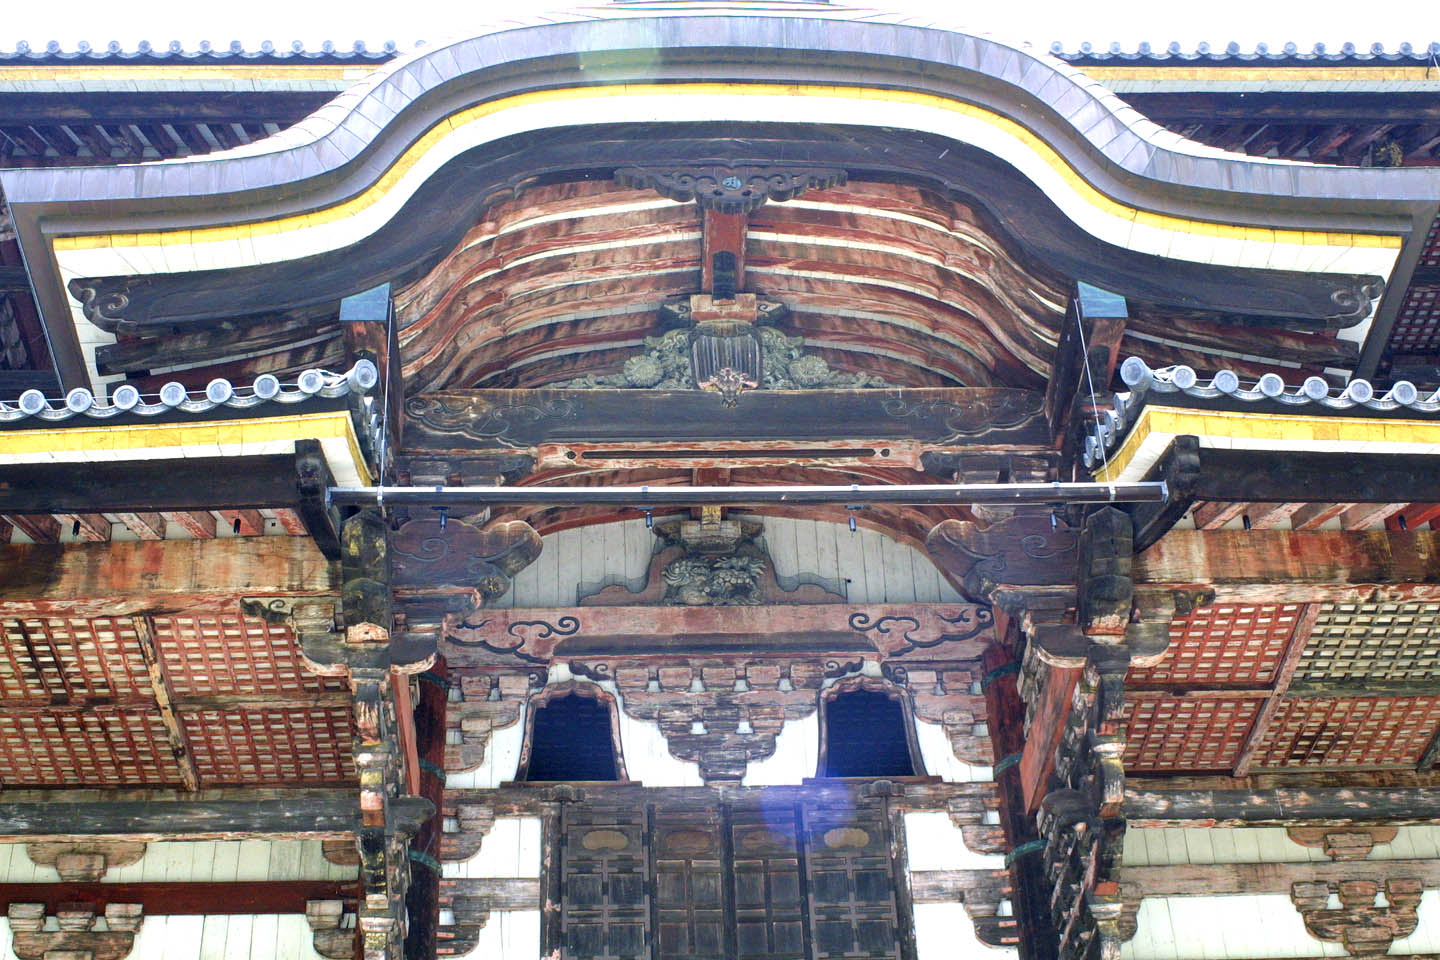 A Buddhist temple in Nara, Japan.